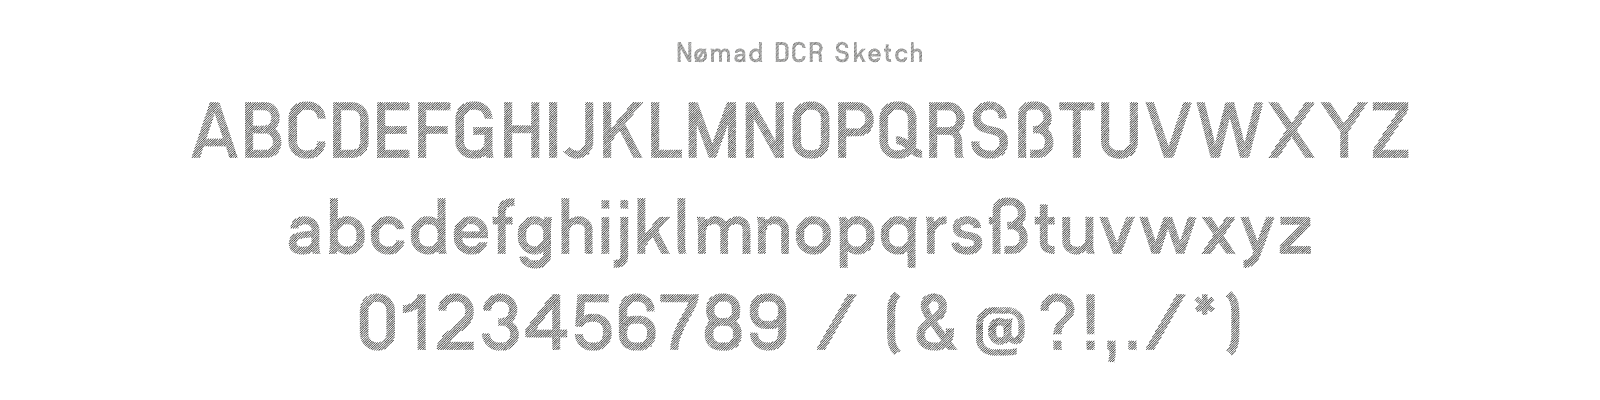 Nomad DCR Scetch